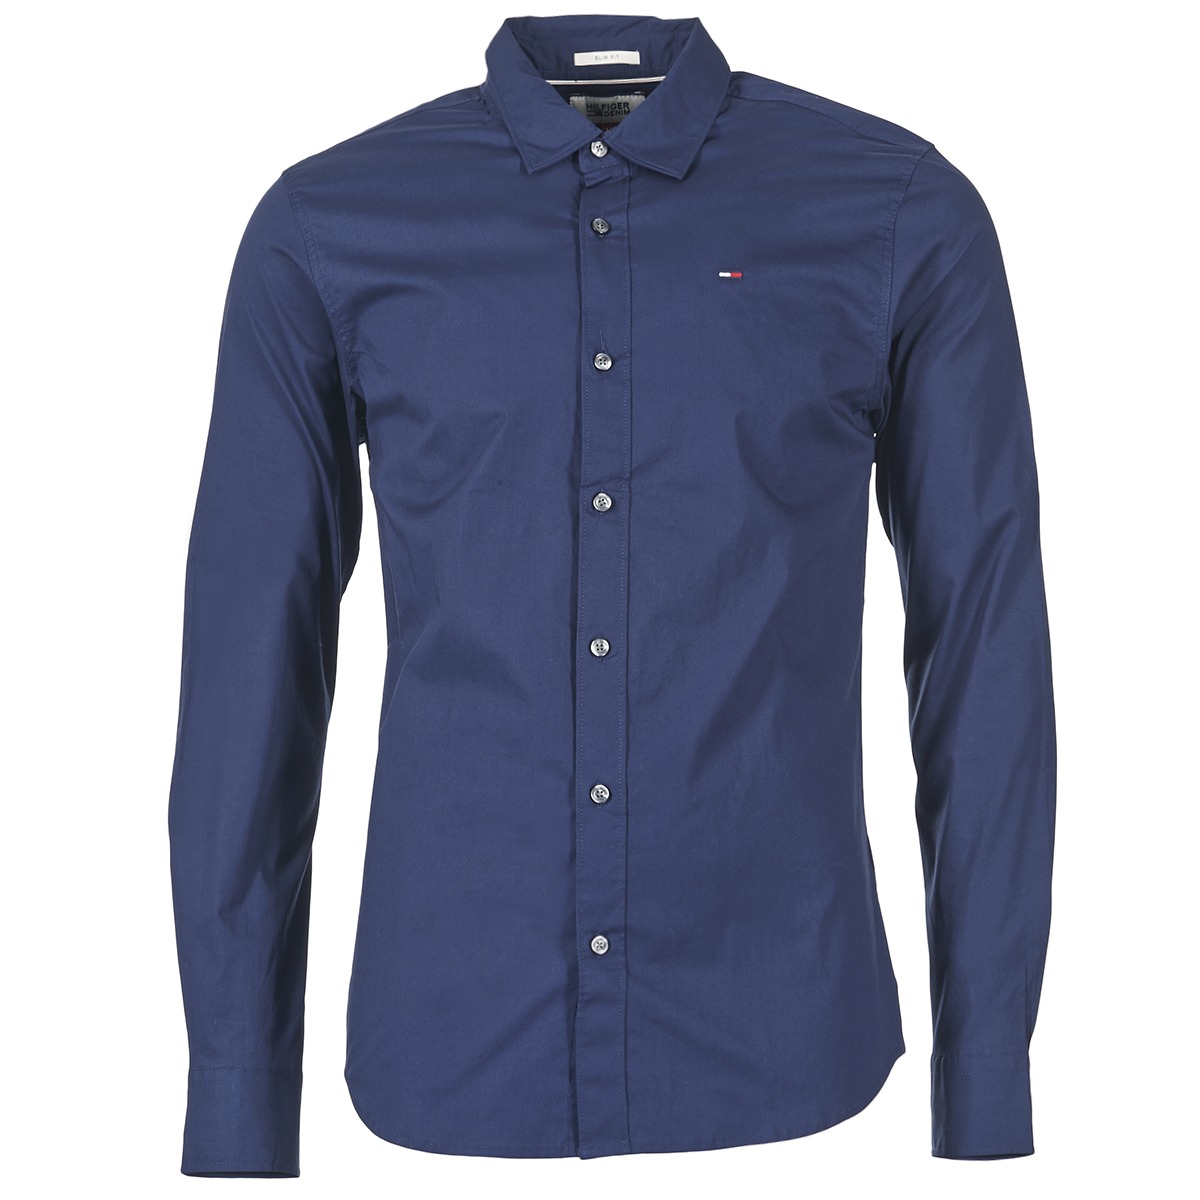 delivery Tommy Marine Clothing Spartoo Fast shirts Jeans - Europe € SHIRT ! STRETCH - 77,00 long-sleeved Men | ORIGINAL TJM